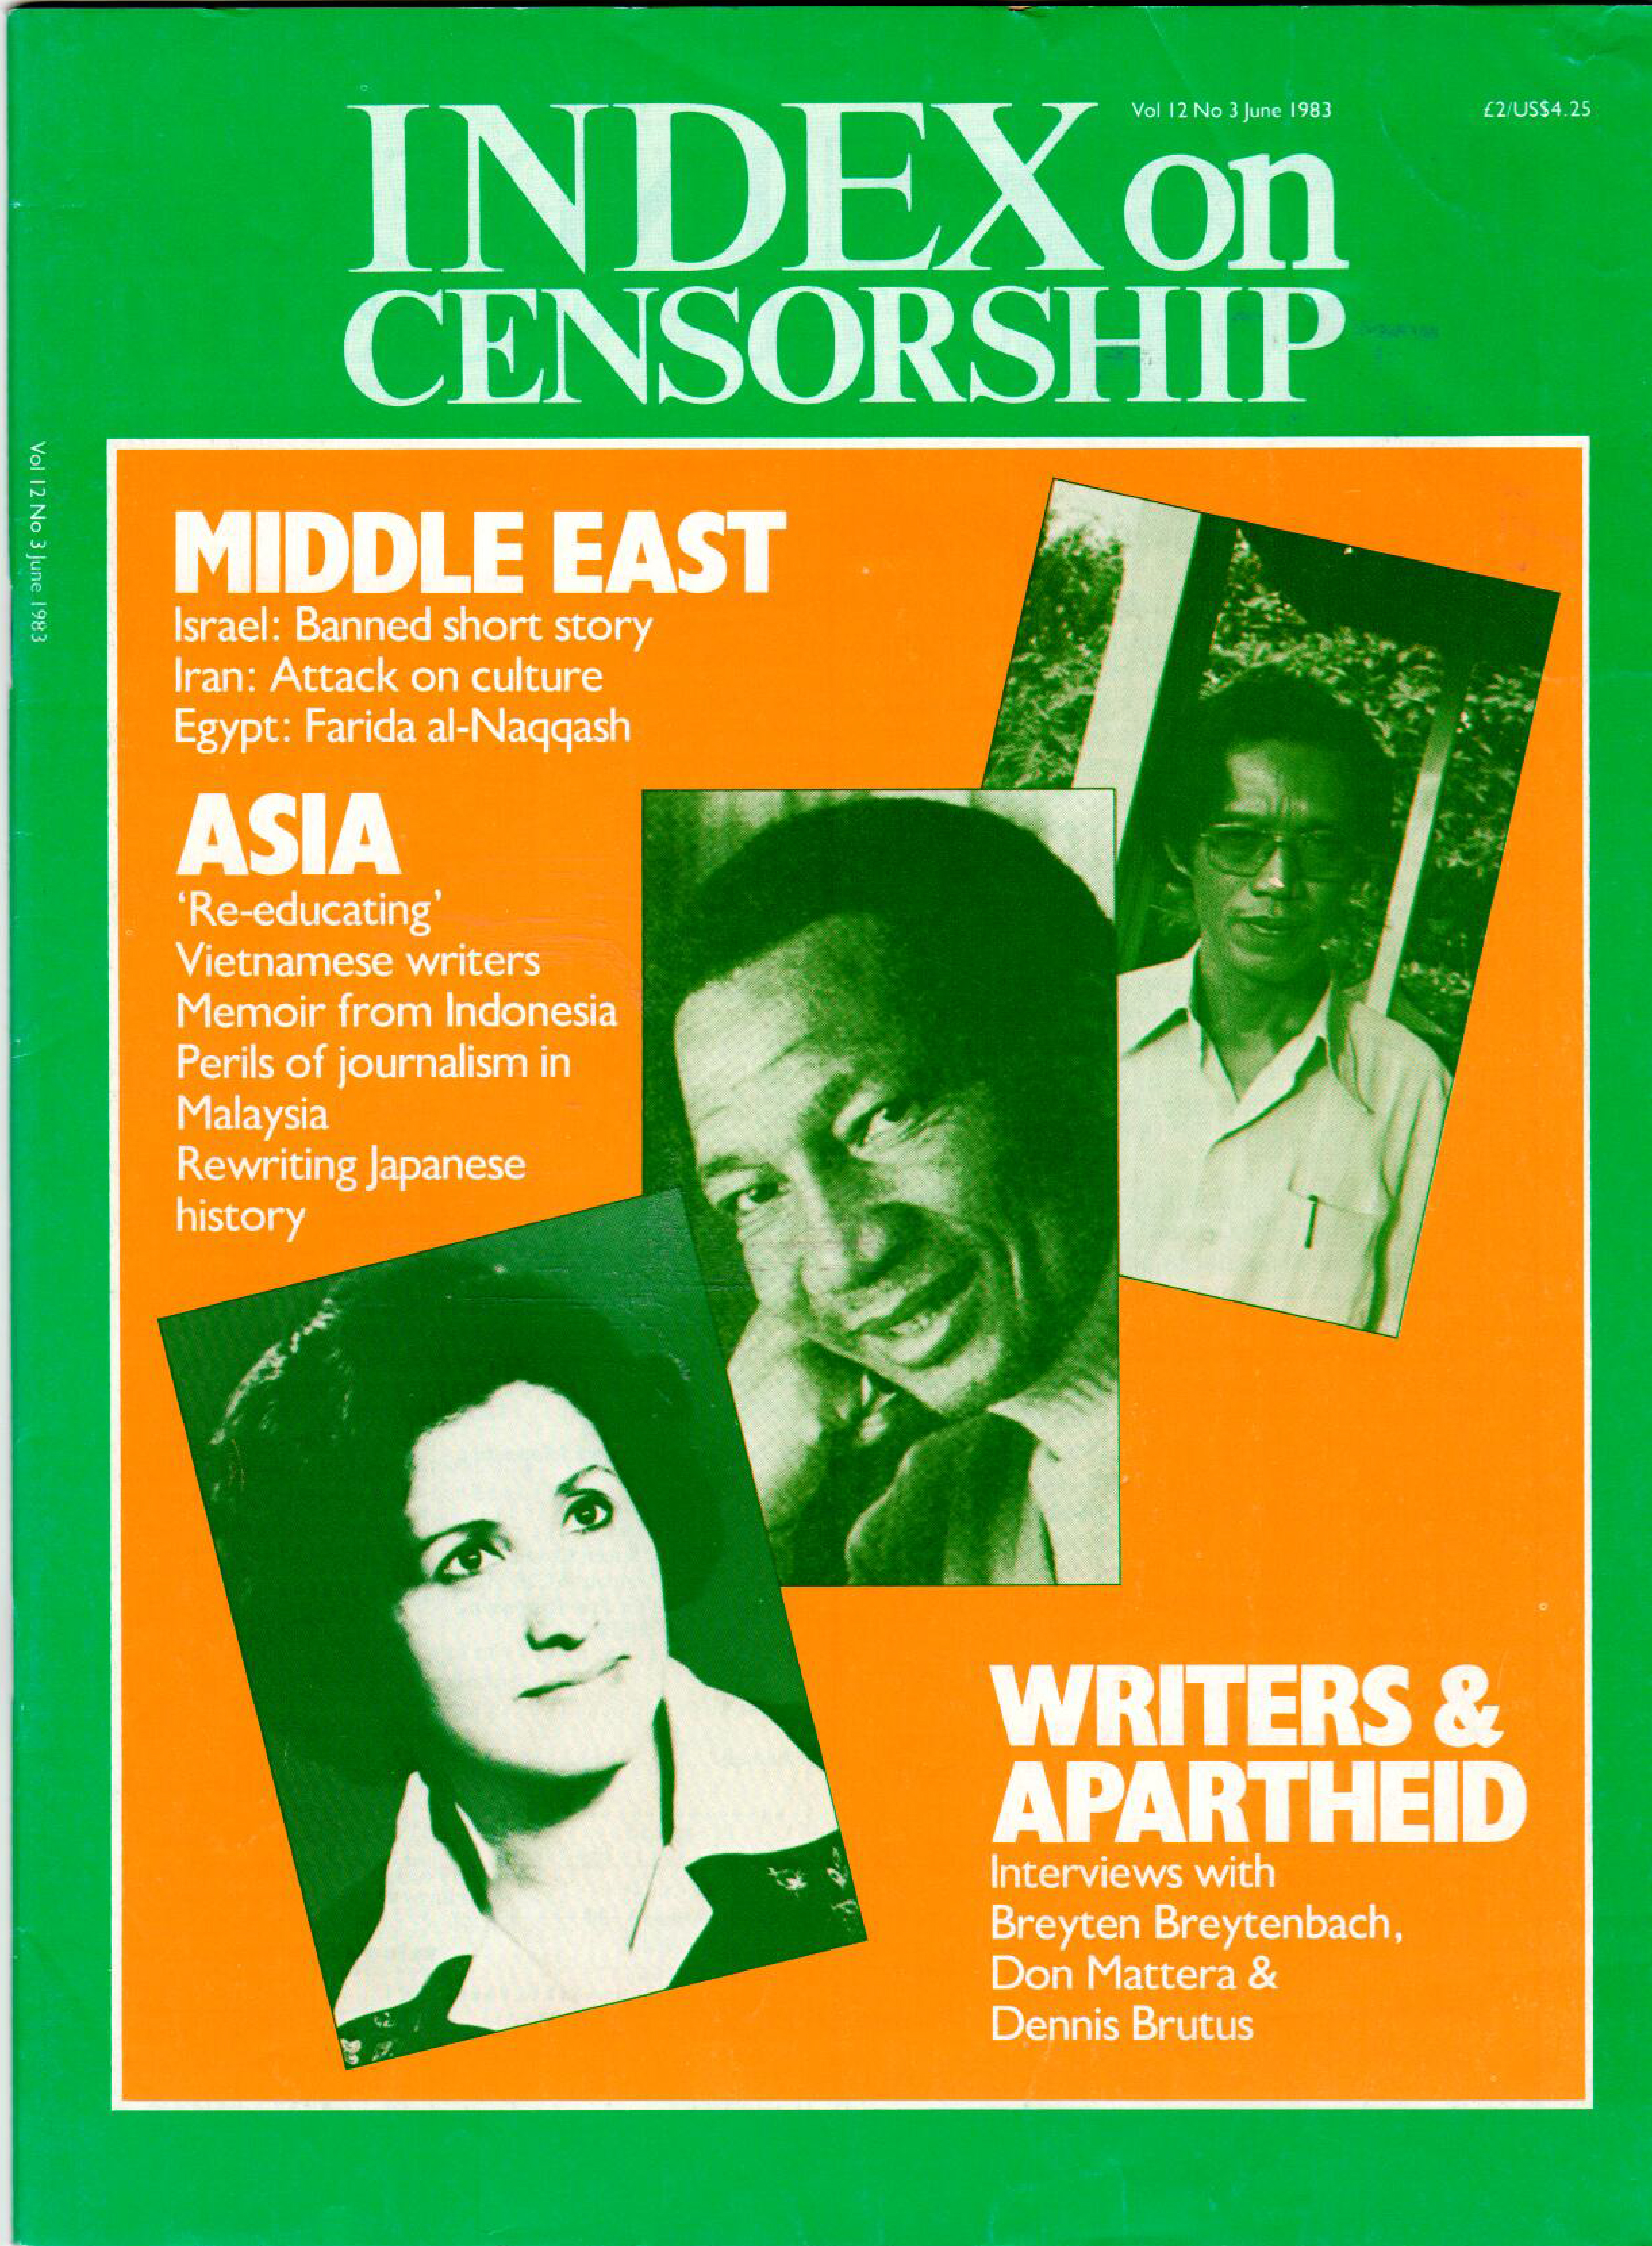 Writers and apartheid